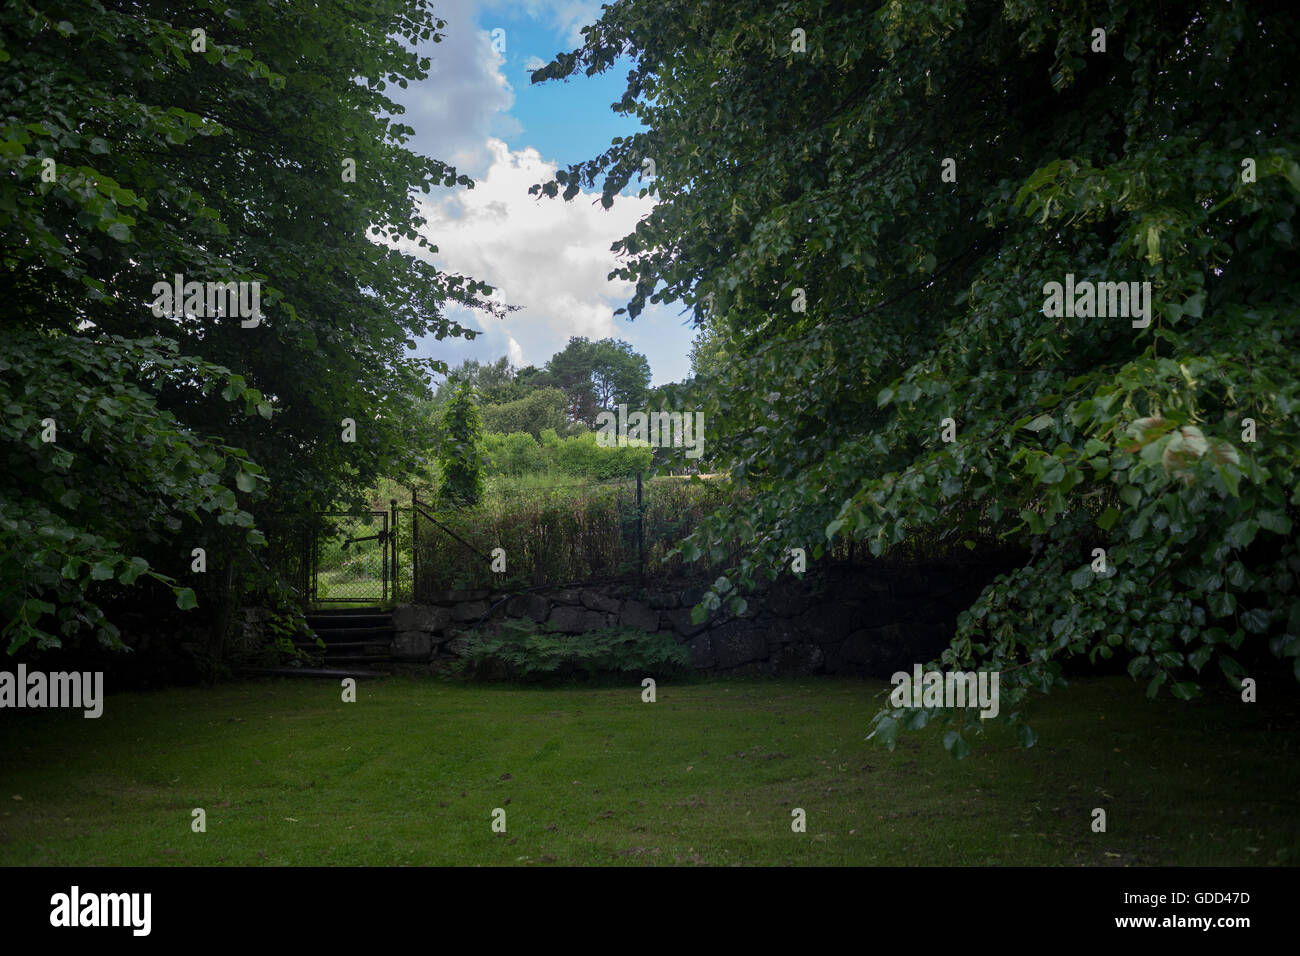 Garden with Linden trees and old stone wall in summer. Stock Photo